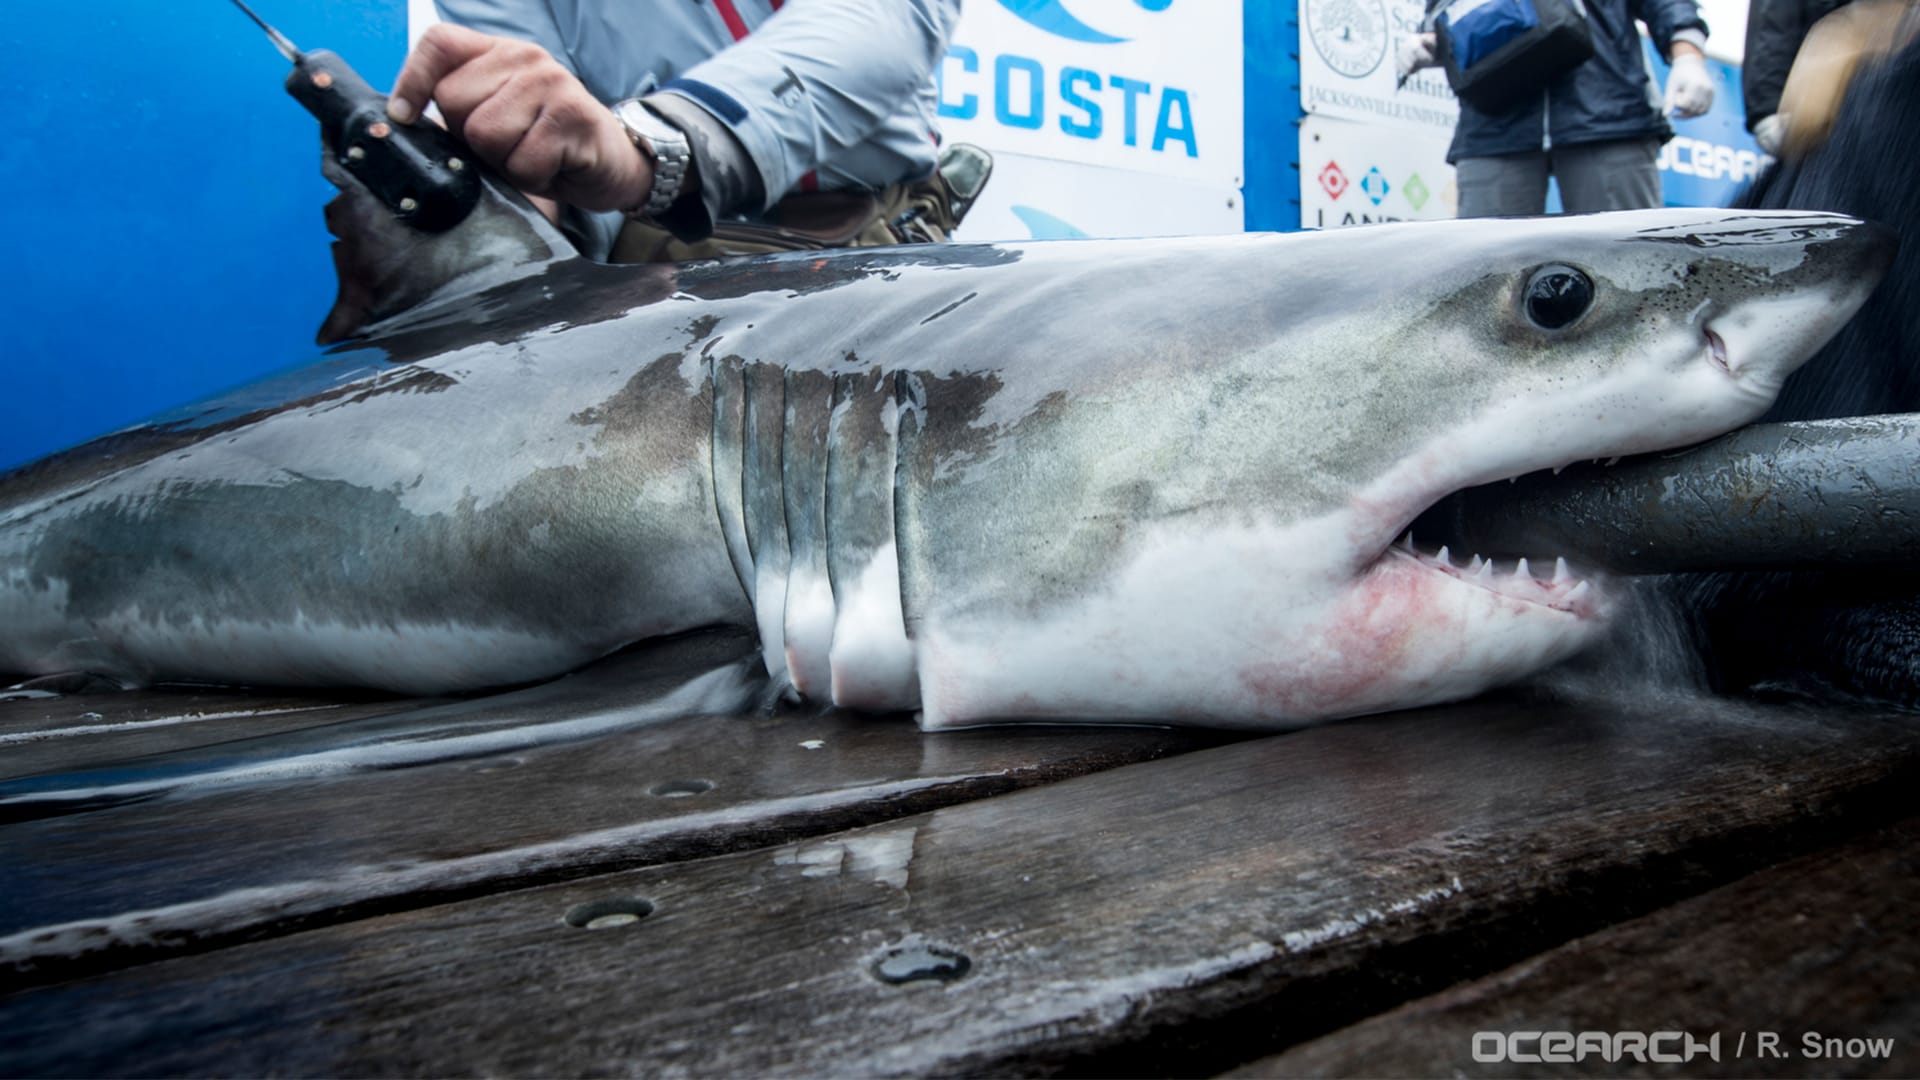 Meet The Team Willingly Going Head-To-Head With Sharks For Research